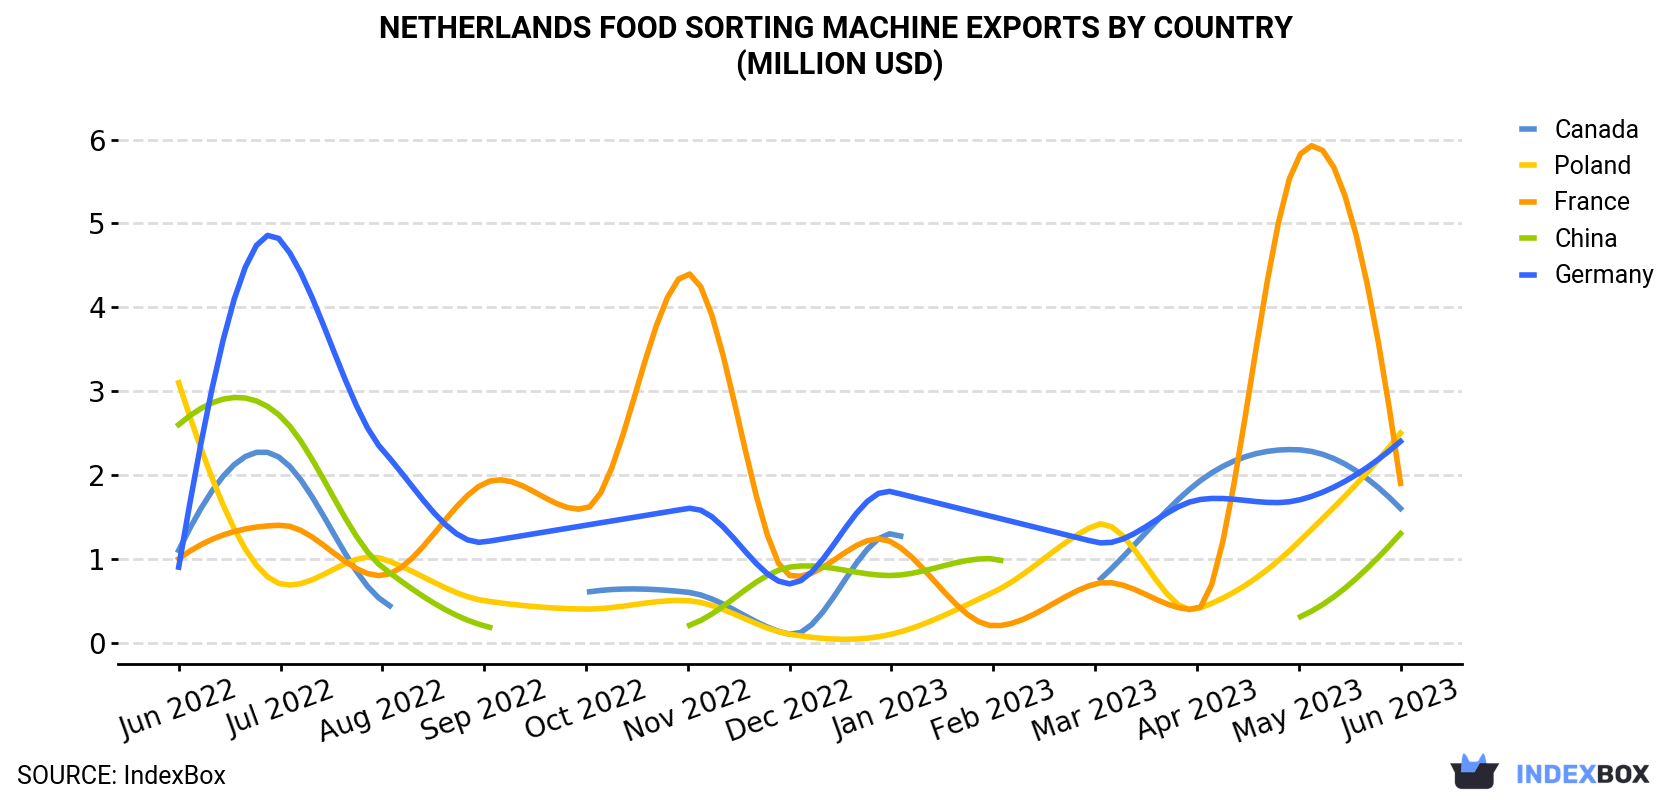 Netherlands Food Sorting Machine Exports By Country (Million USD)